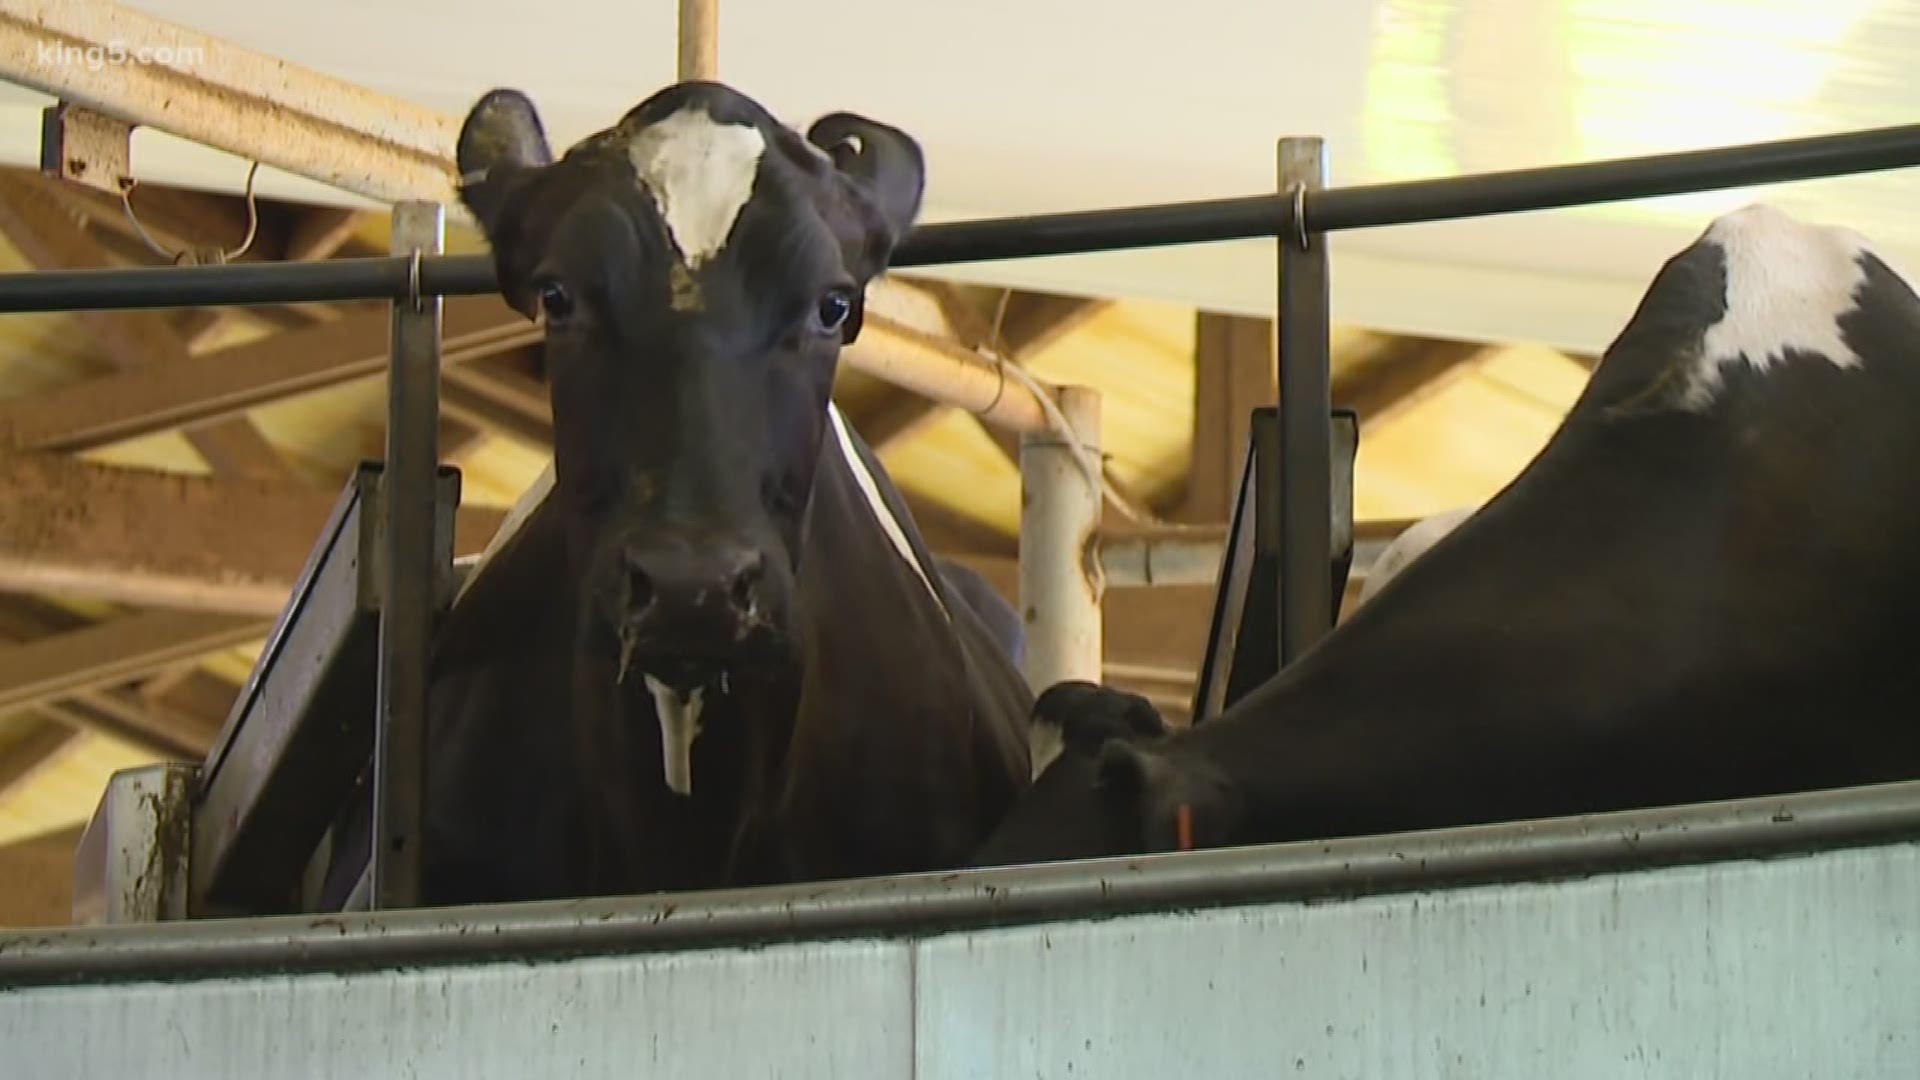 The State of Washington is working with local dairy farmers to help improve the quality of our water. KING 5's Sebastian Robertson gives us an inside look at the newest technology in action at a dairy farm in Deming, up in Whatcom County.